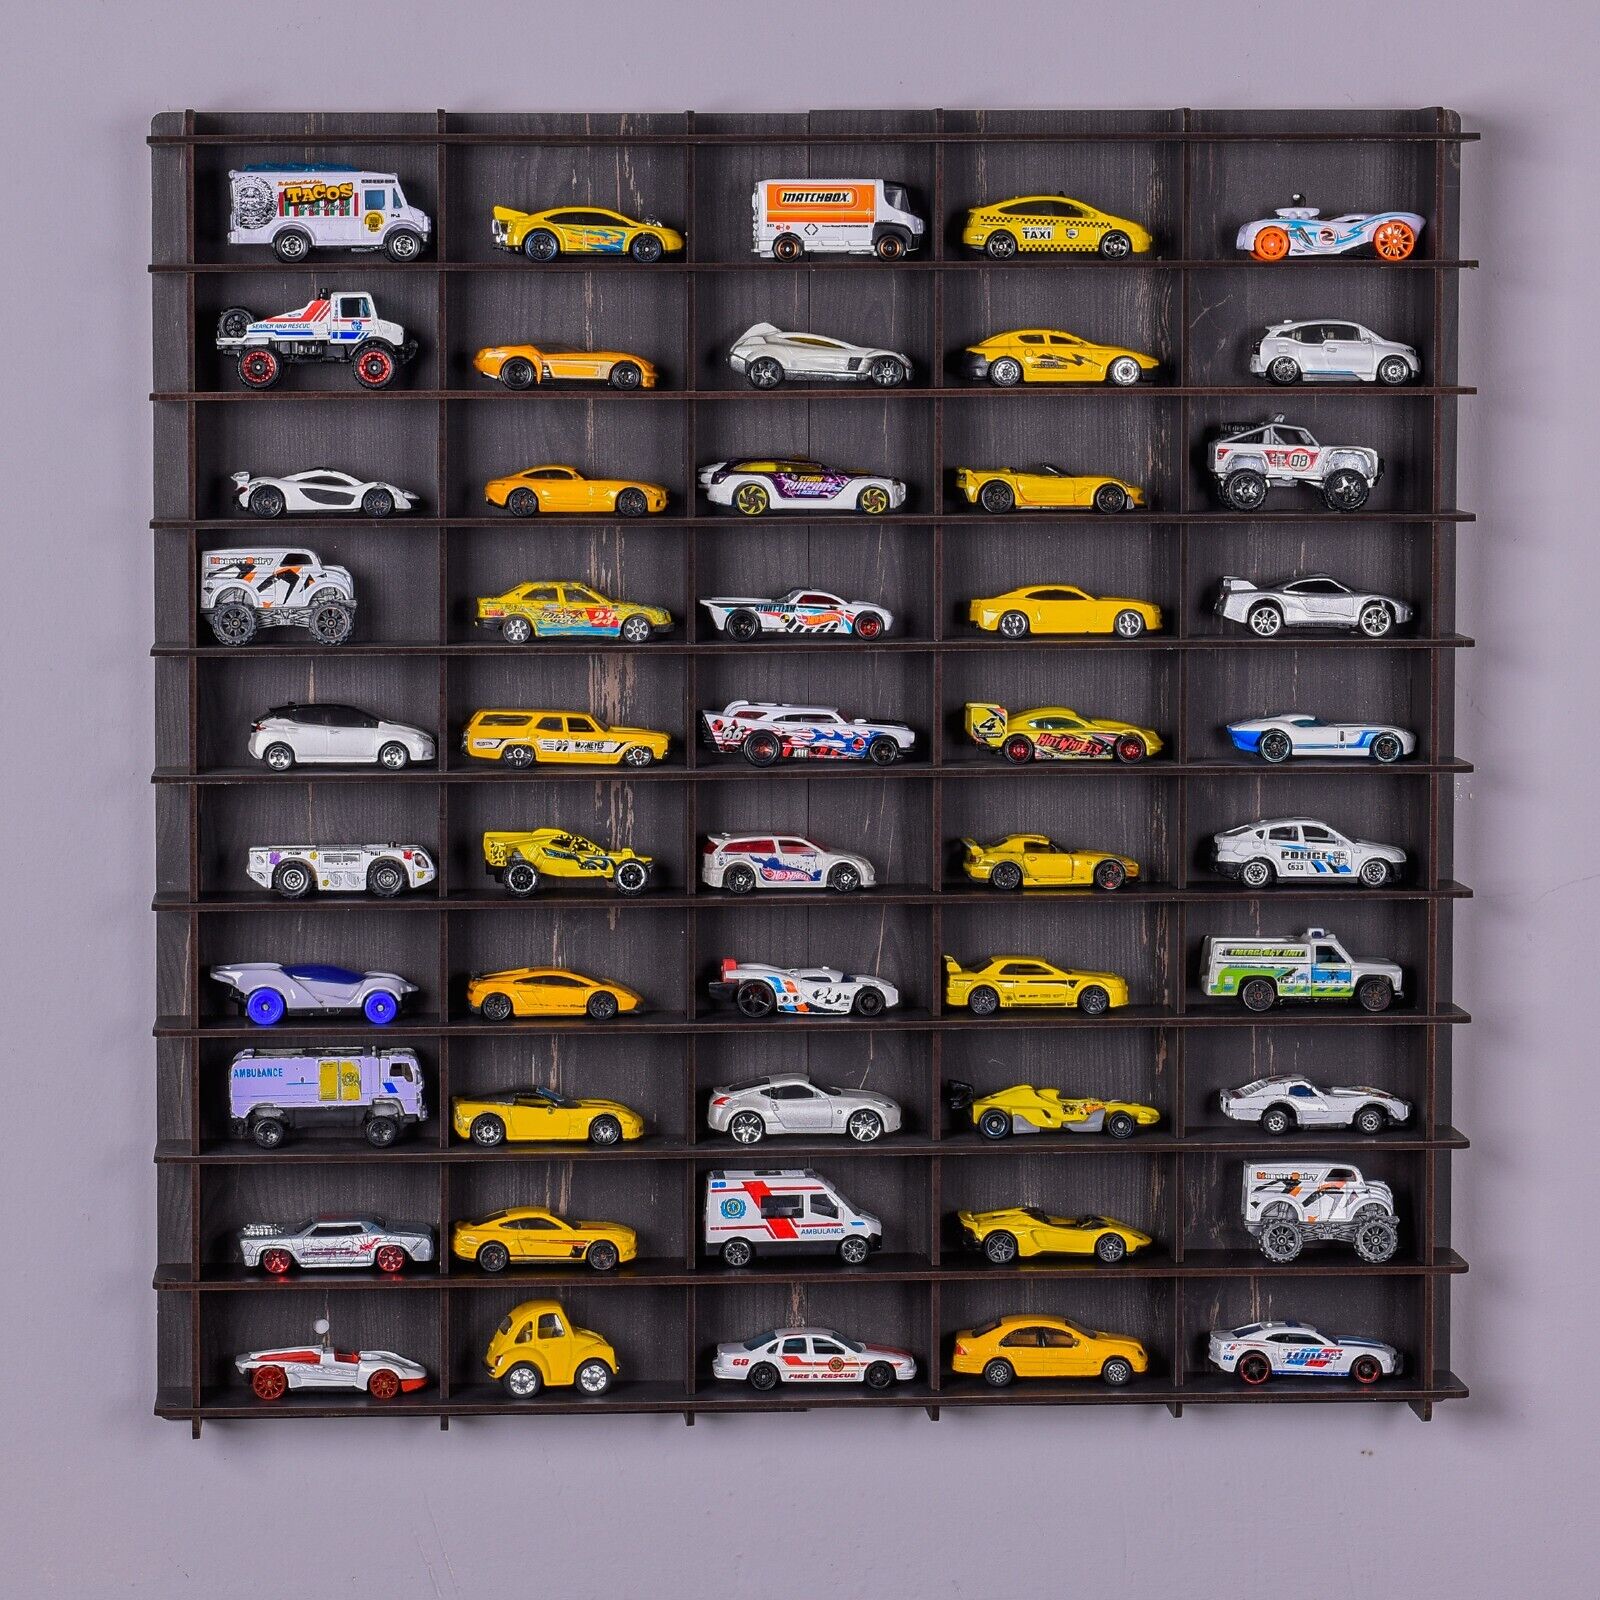 1:64 Toy Car Wall Shelf, Hotwheels,Matchbox Compatible Display Case for 50 Cars